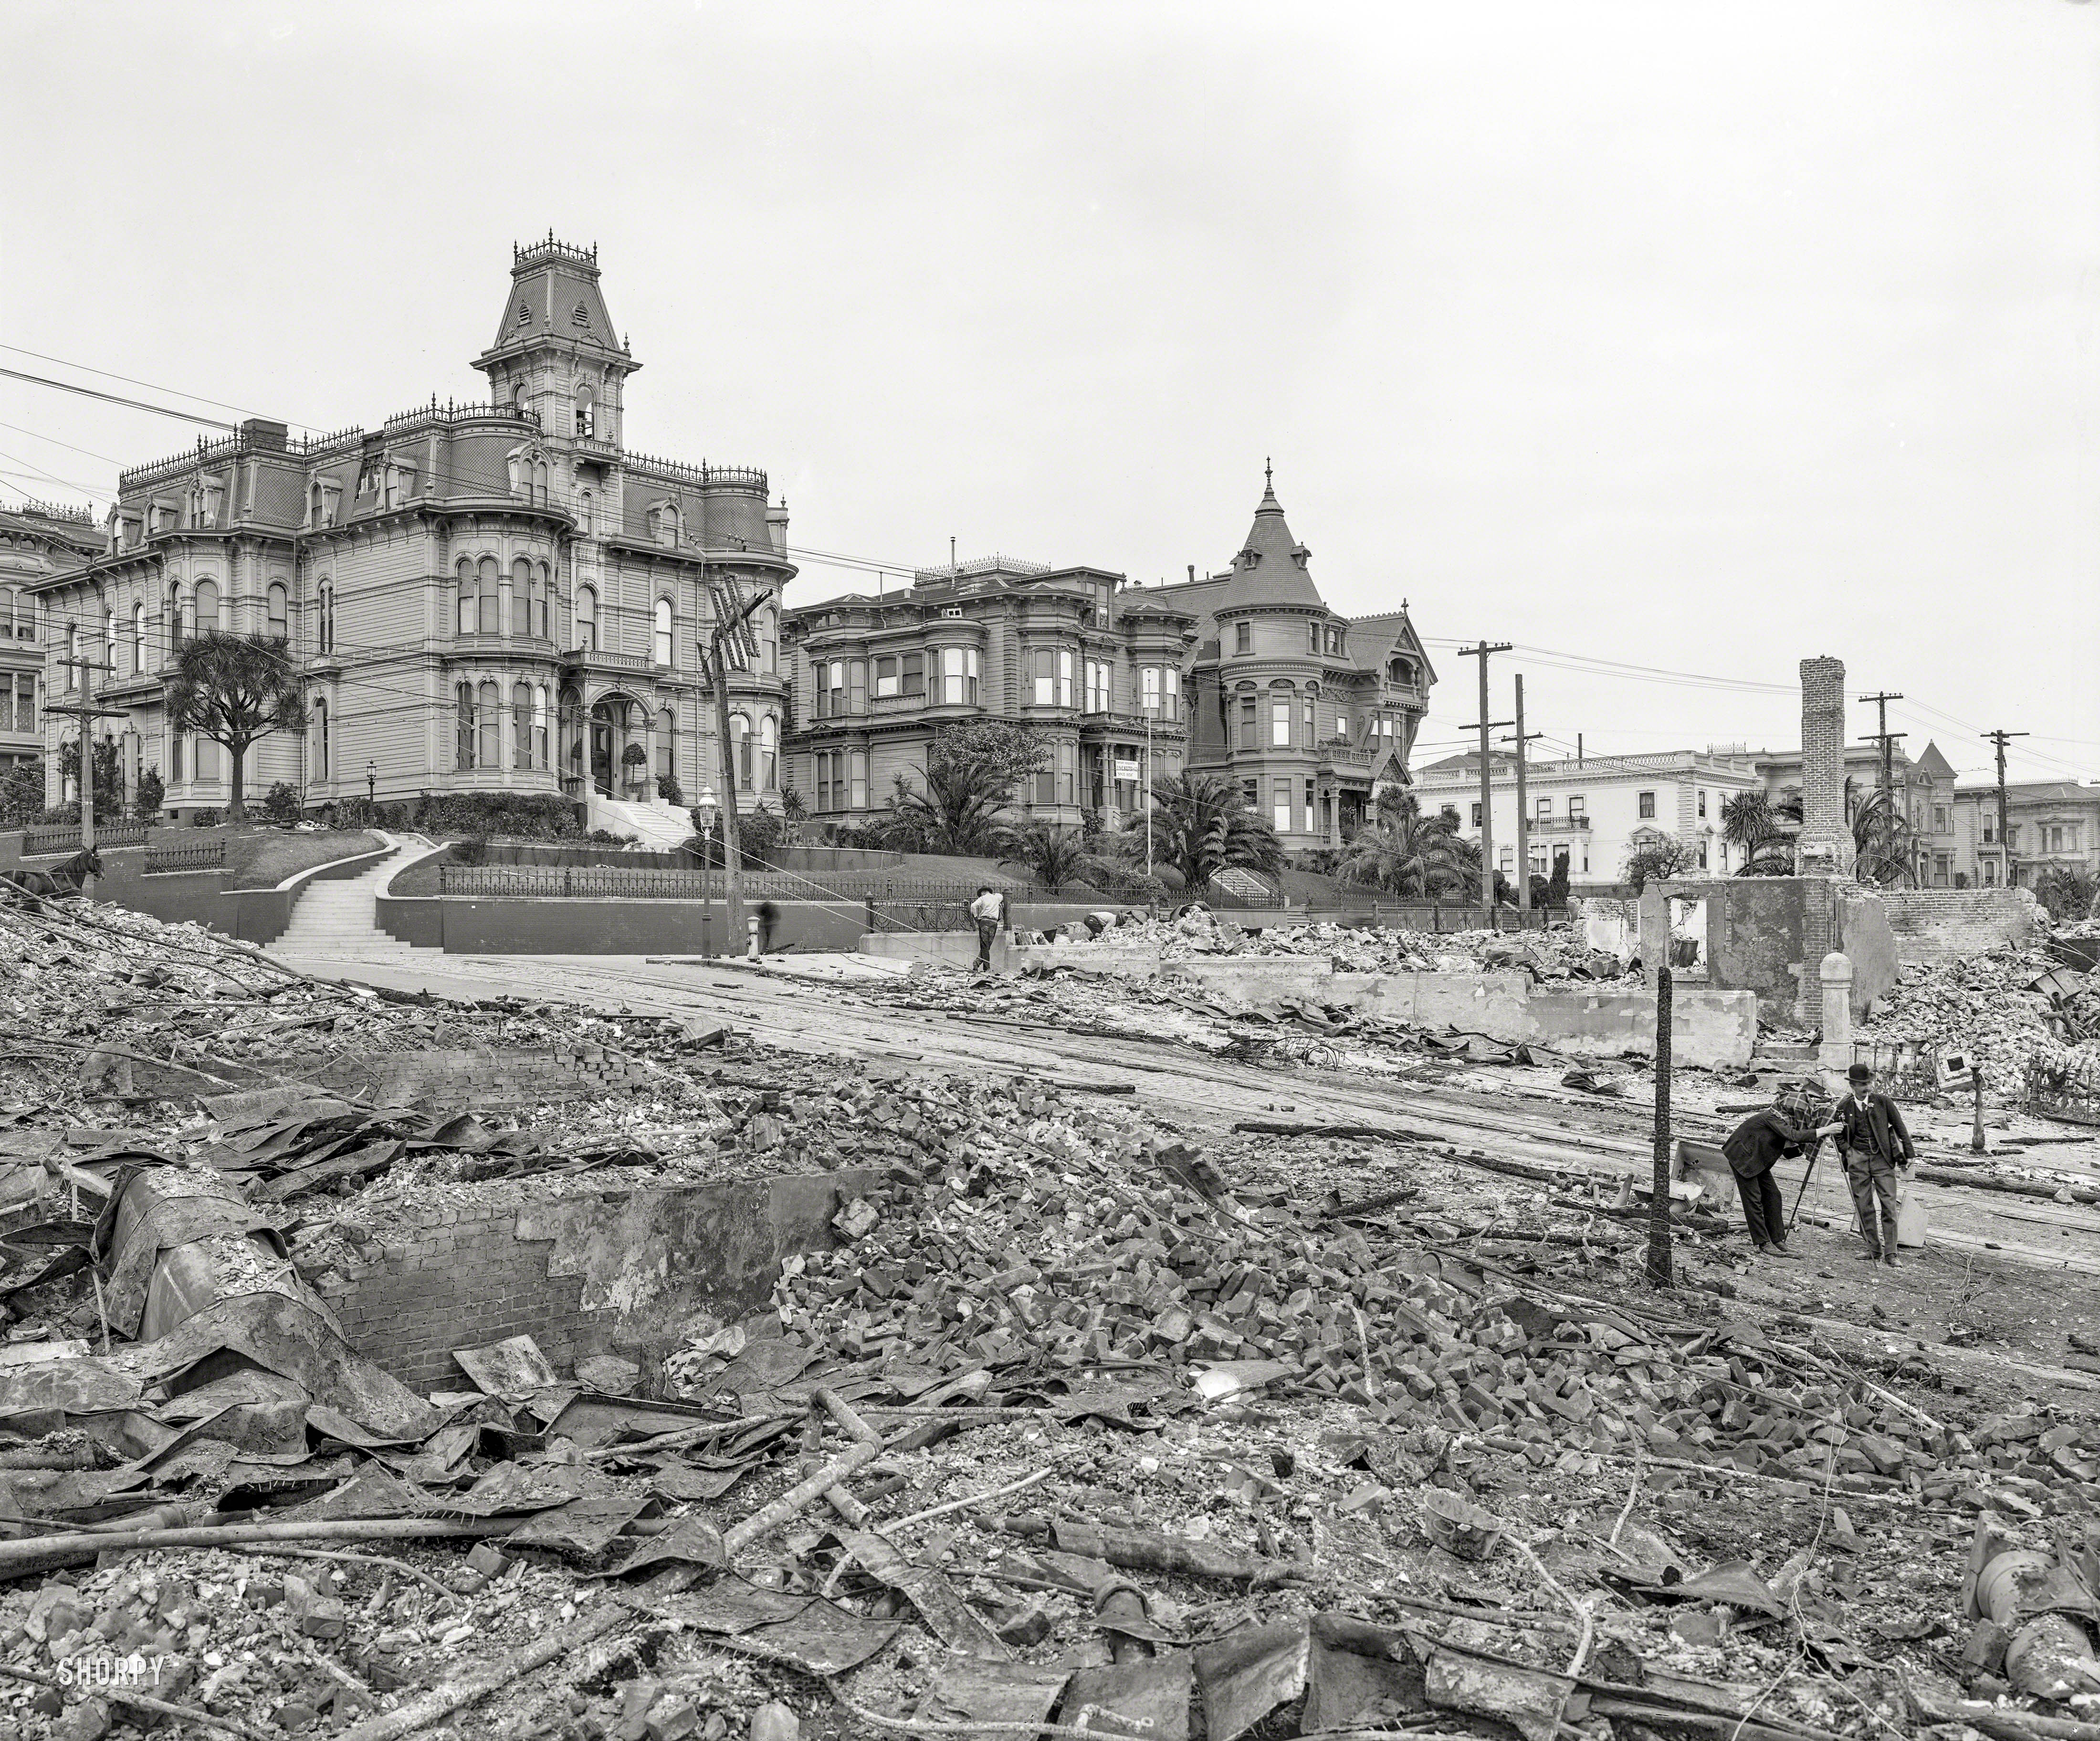 "Edge of burned district, corner of Franklin and Sacramento Streets, San Francisco." Aftermath of the April 18, 1906, earthquake and fire. 8x10 inch dry plate glass negative, Detroit Publishing Company. View full size.